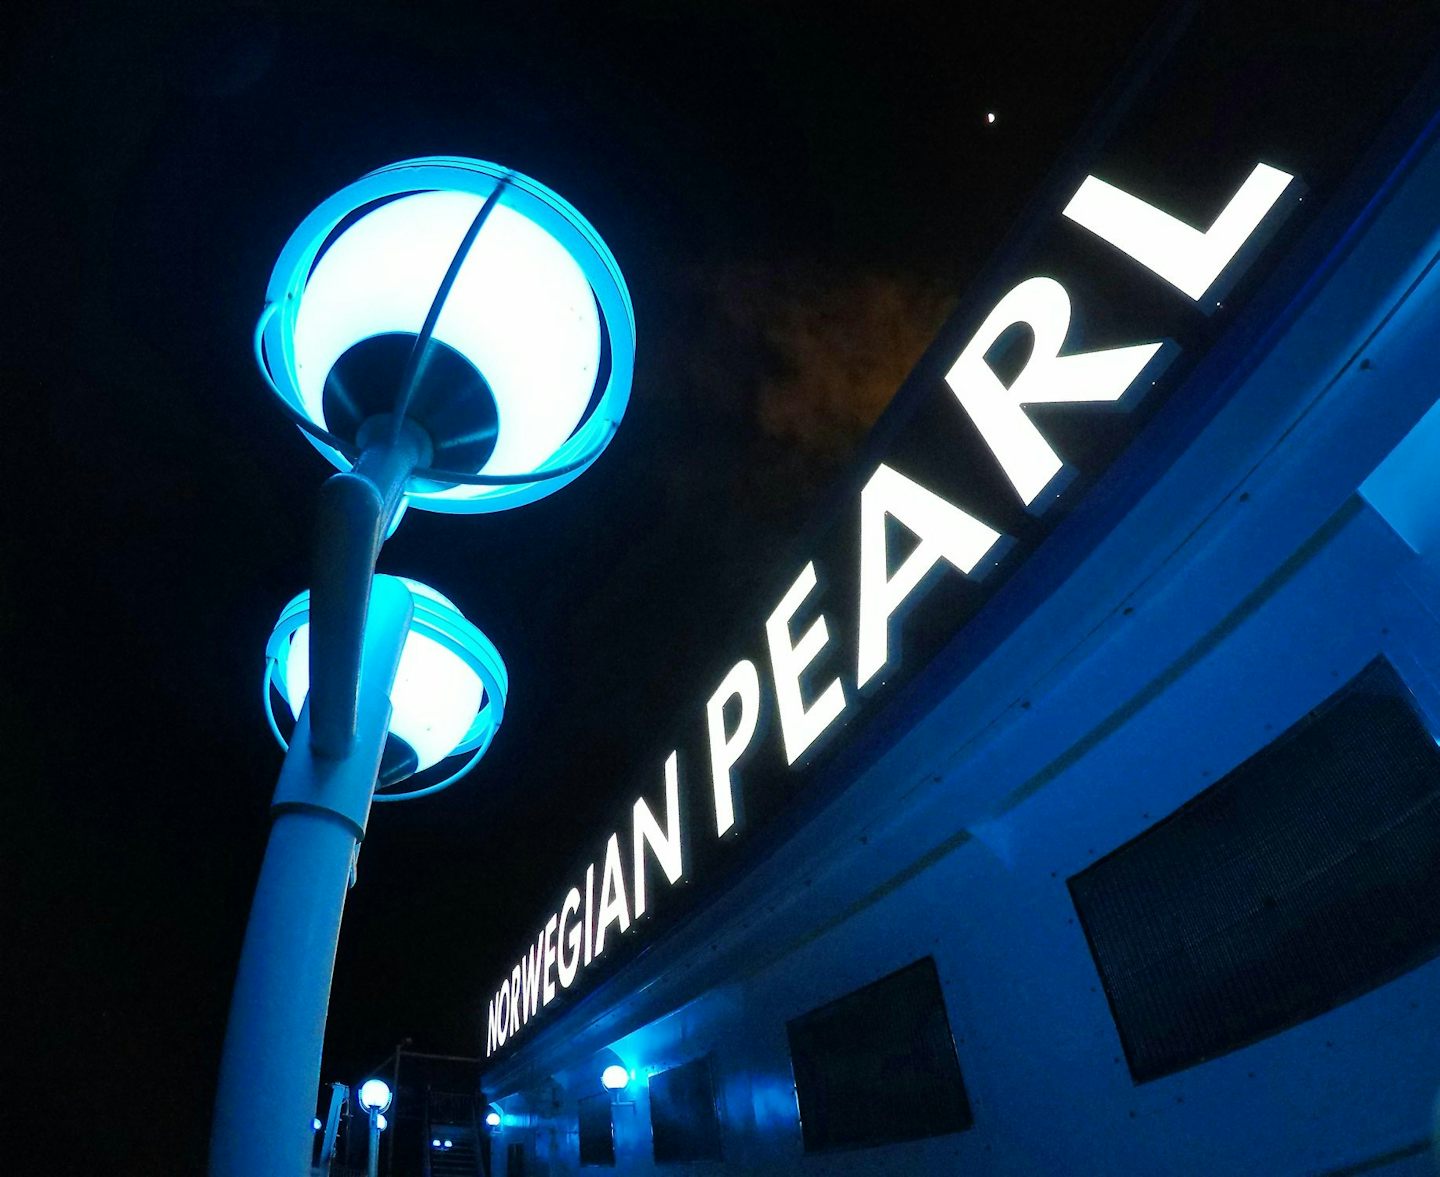 Night pix of the Pearl sign